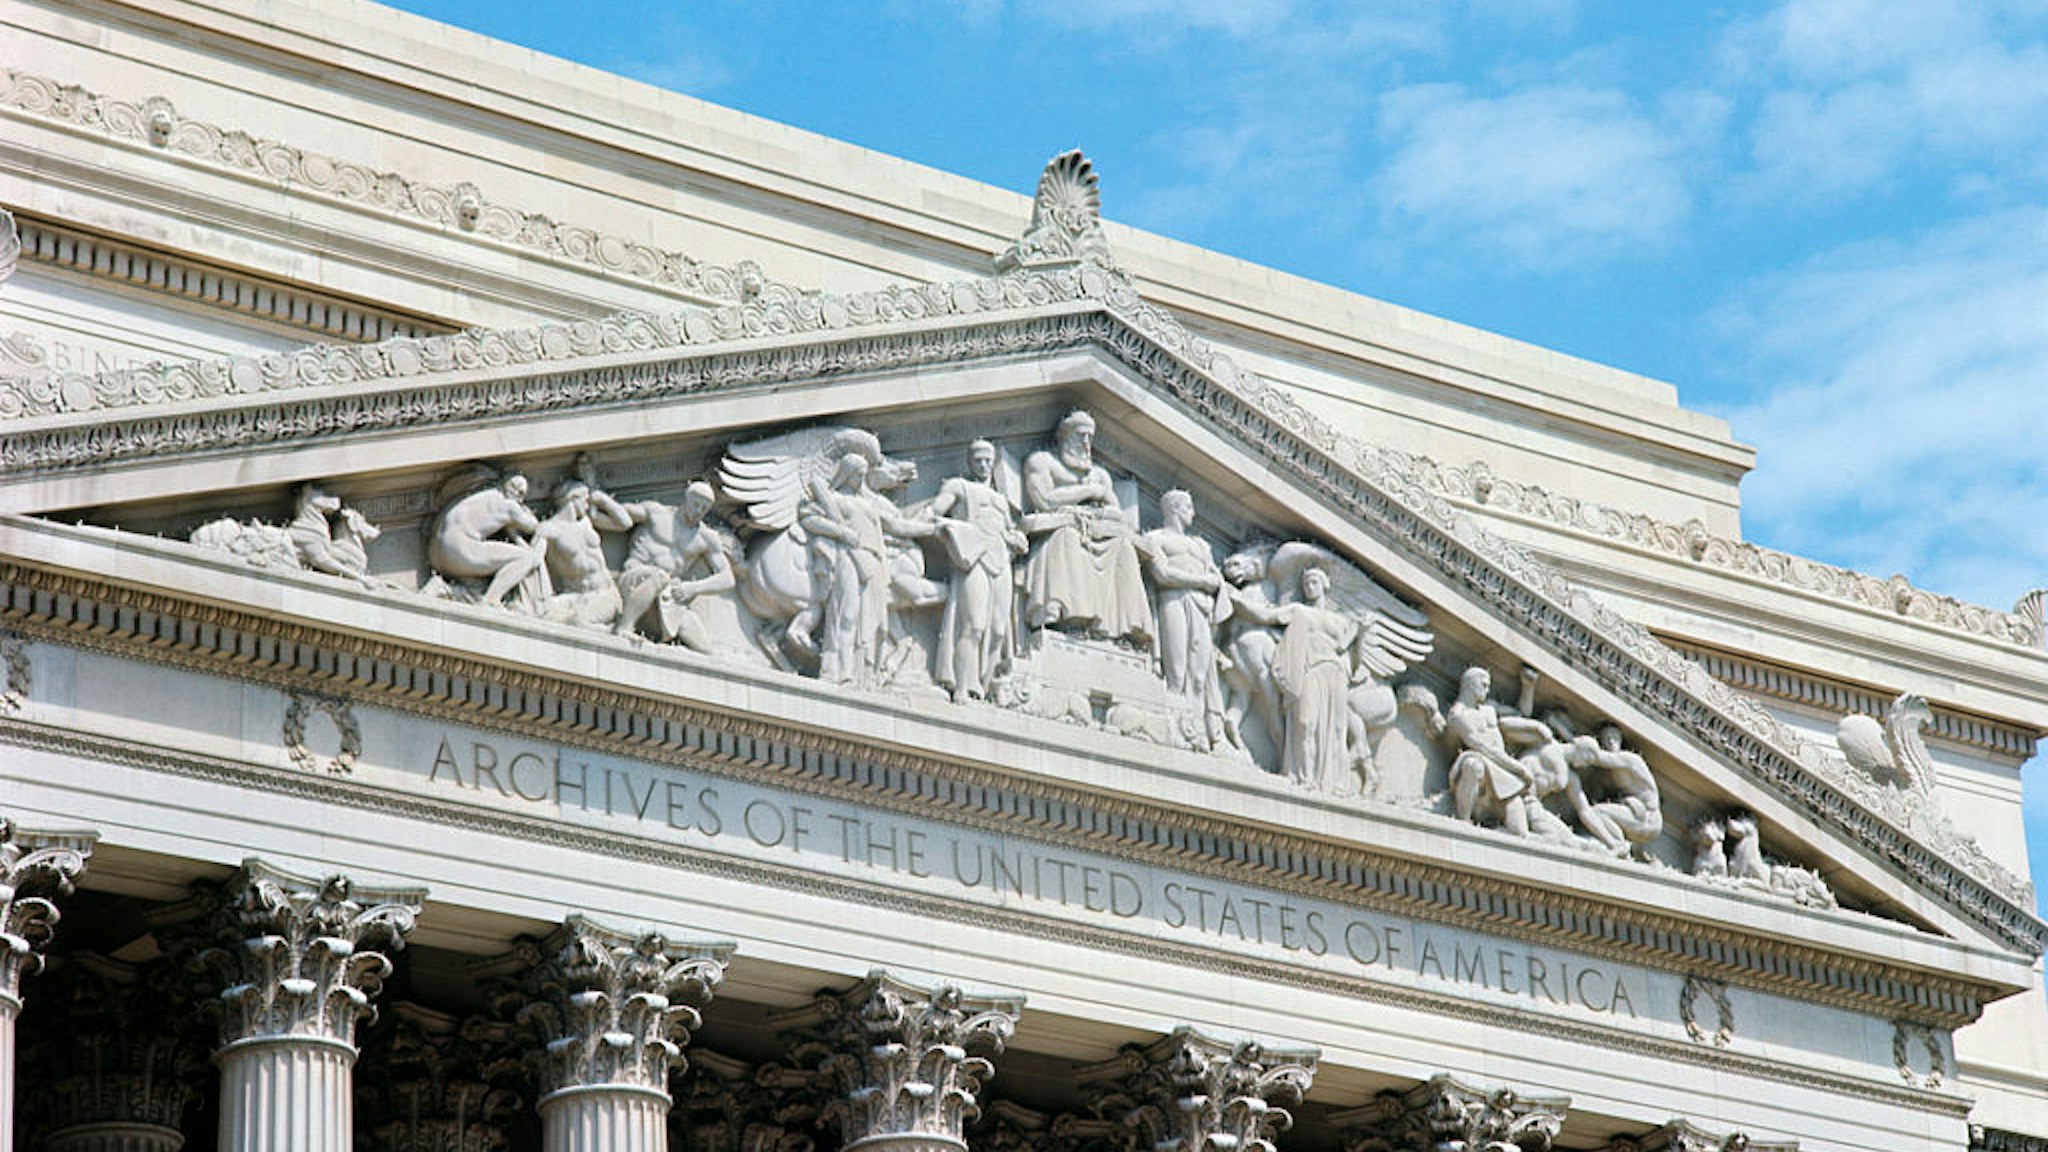 1960s ARCHITECTURAL DETAIL OF THE PEDIMENT OF THE NATIONAL ARCHIVES BUILDING IN WASHINGTON DC (Photo by H. Armstrong Roberts/ClassicStock/Getty Images)